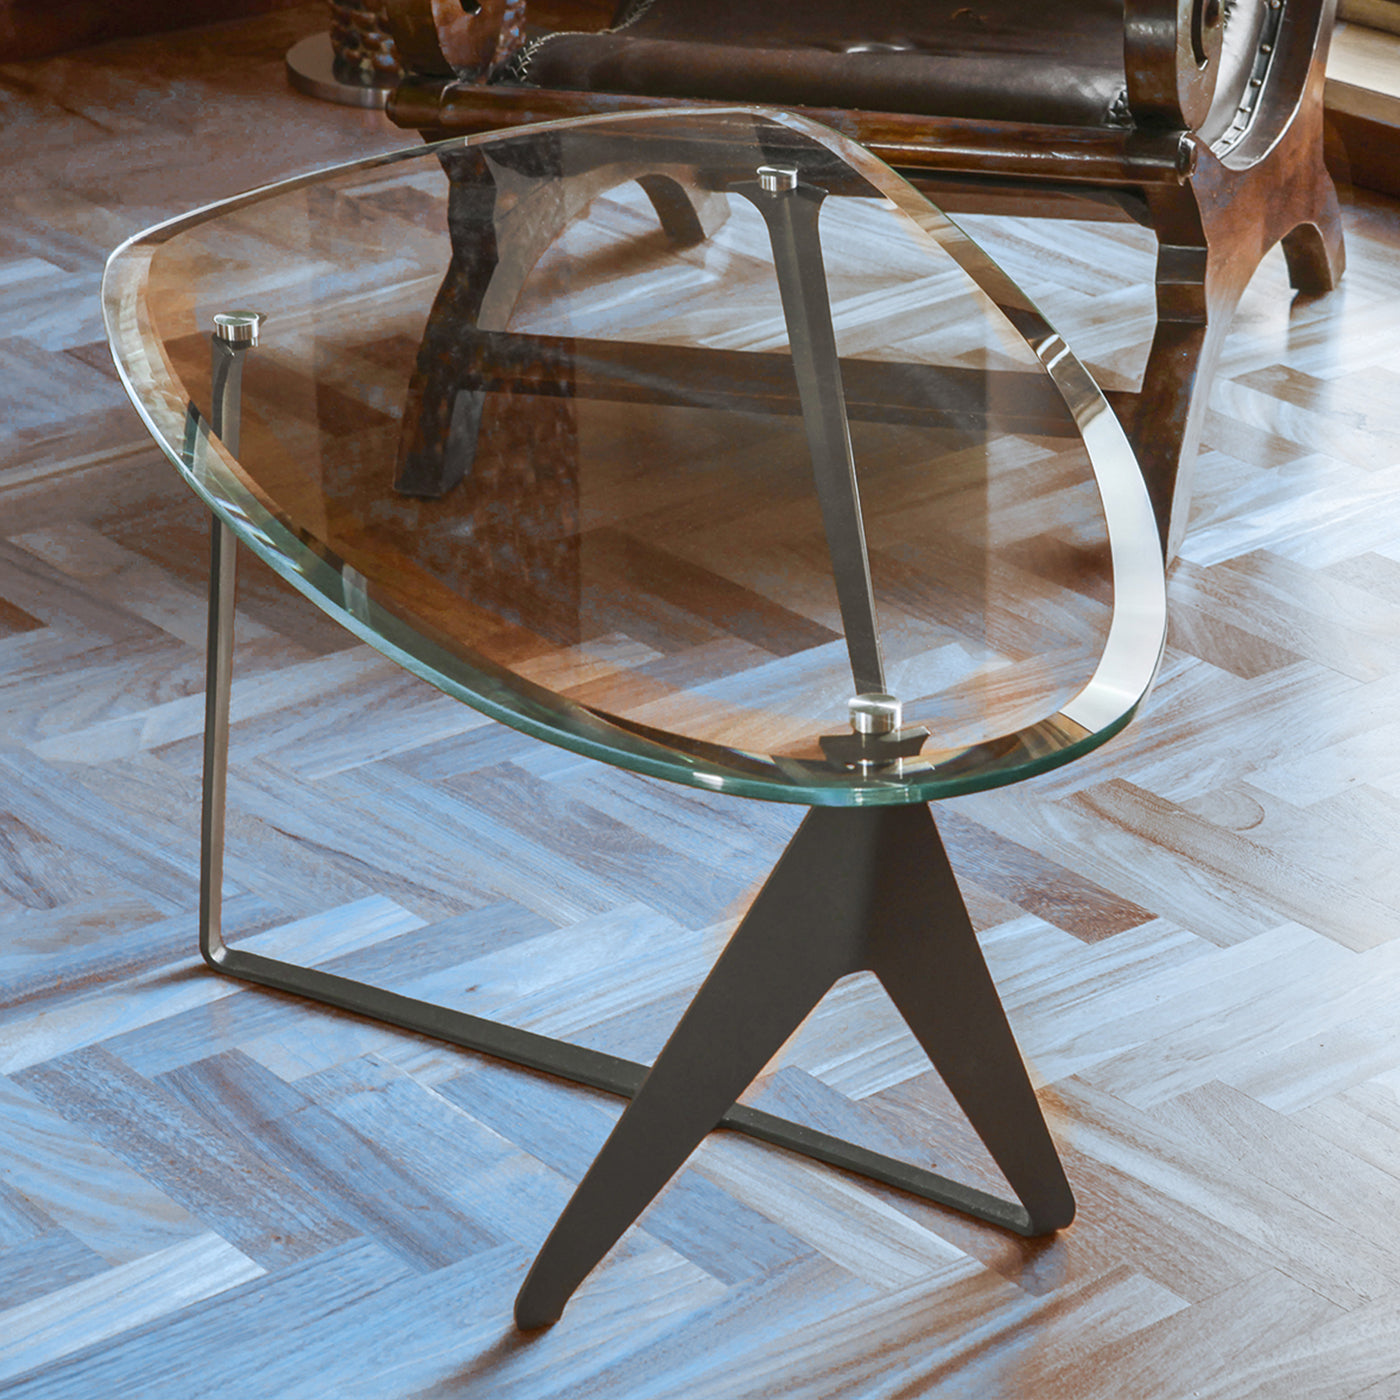 Ted Crystal Coffee Table - Alternative view 1